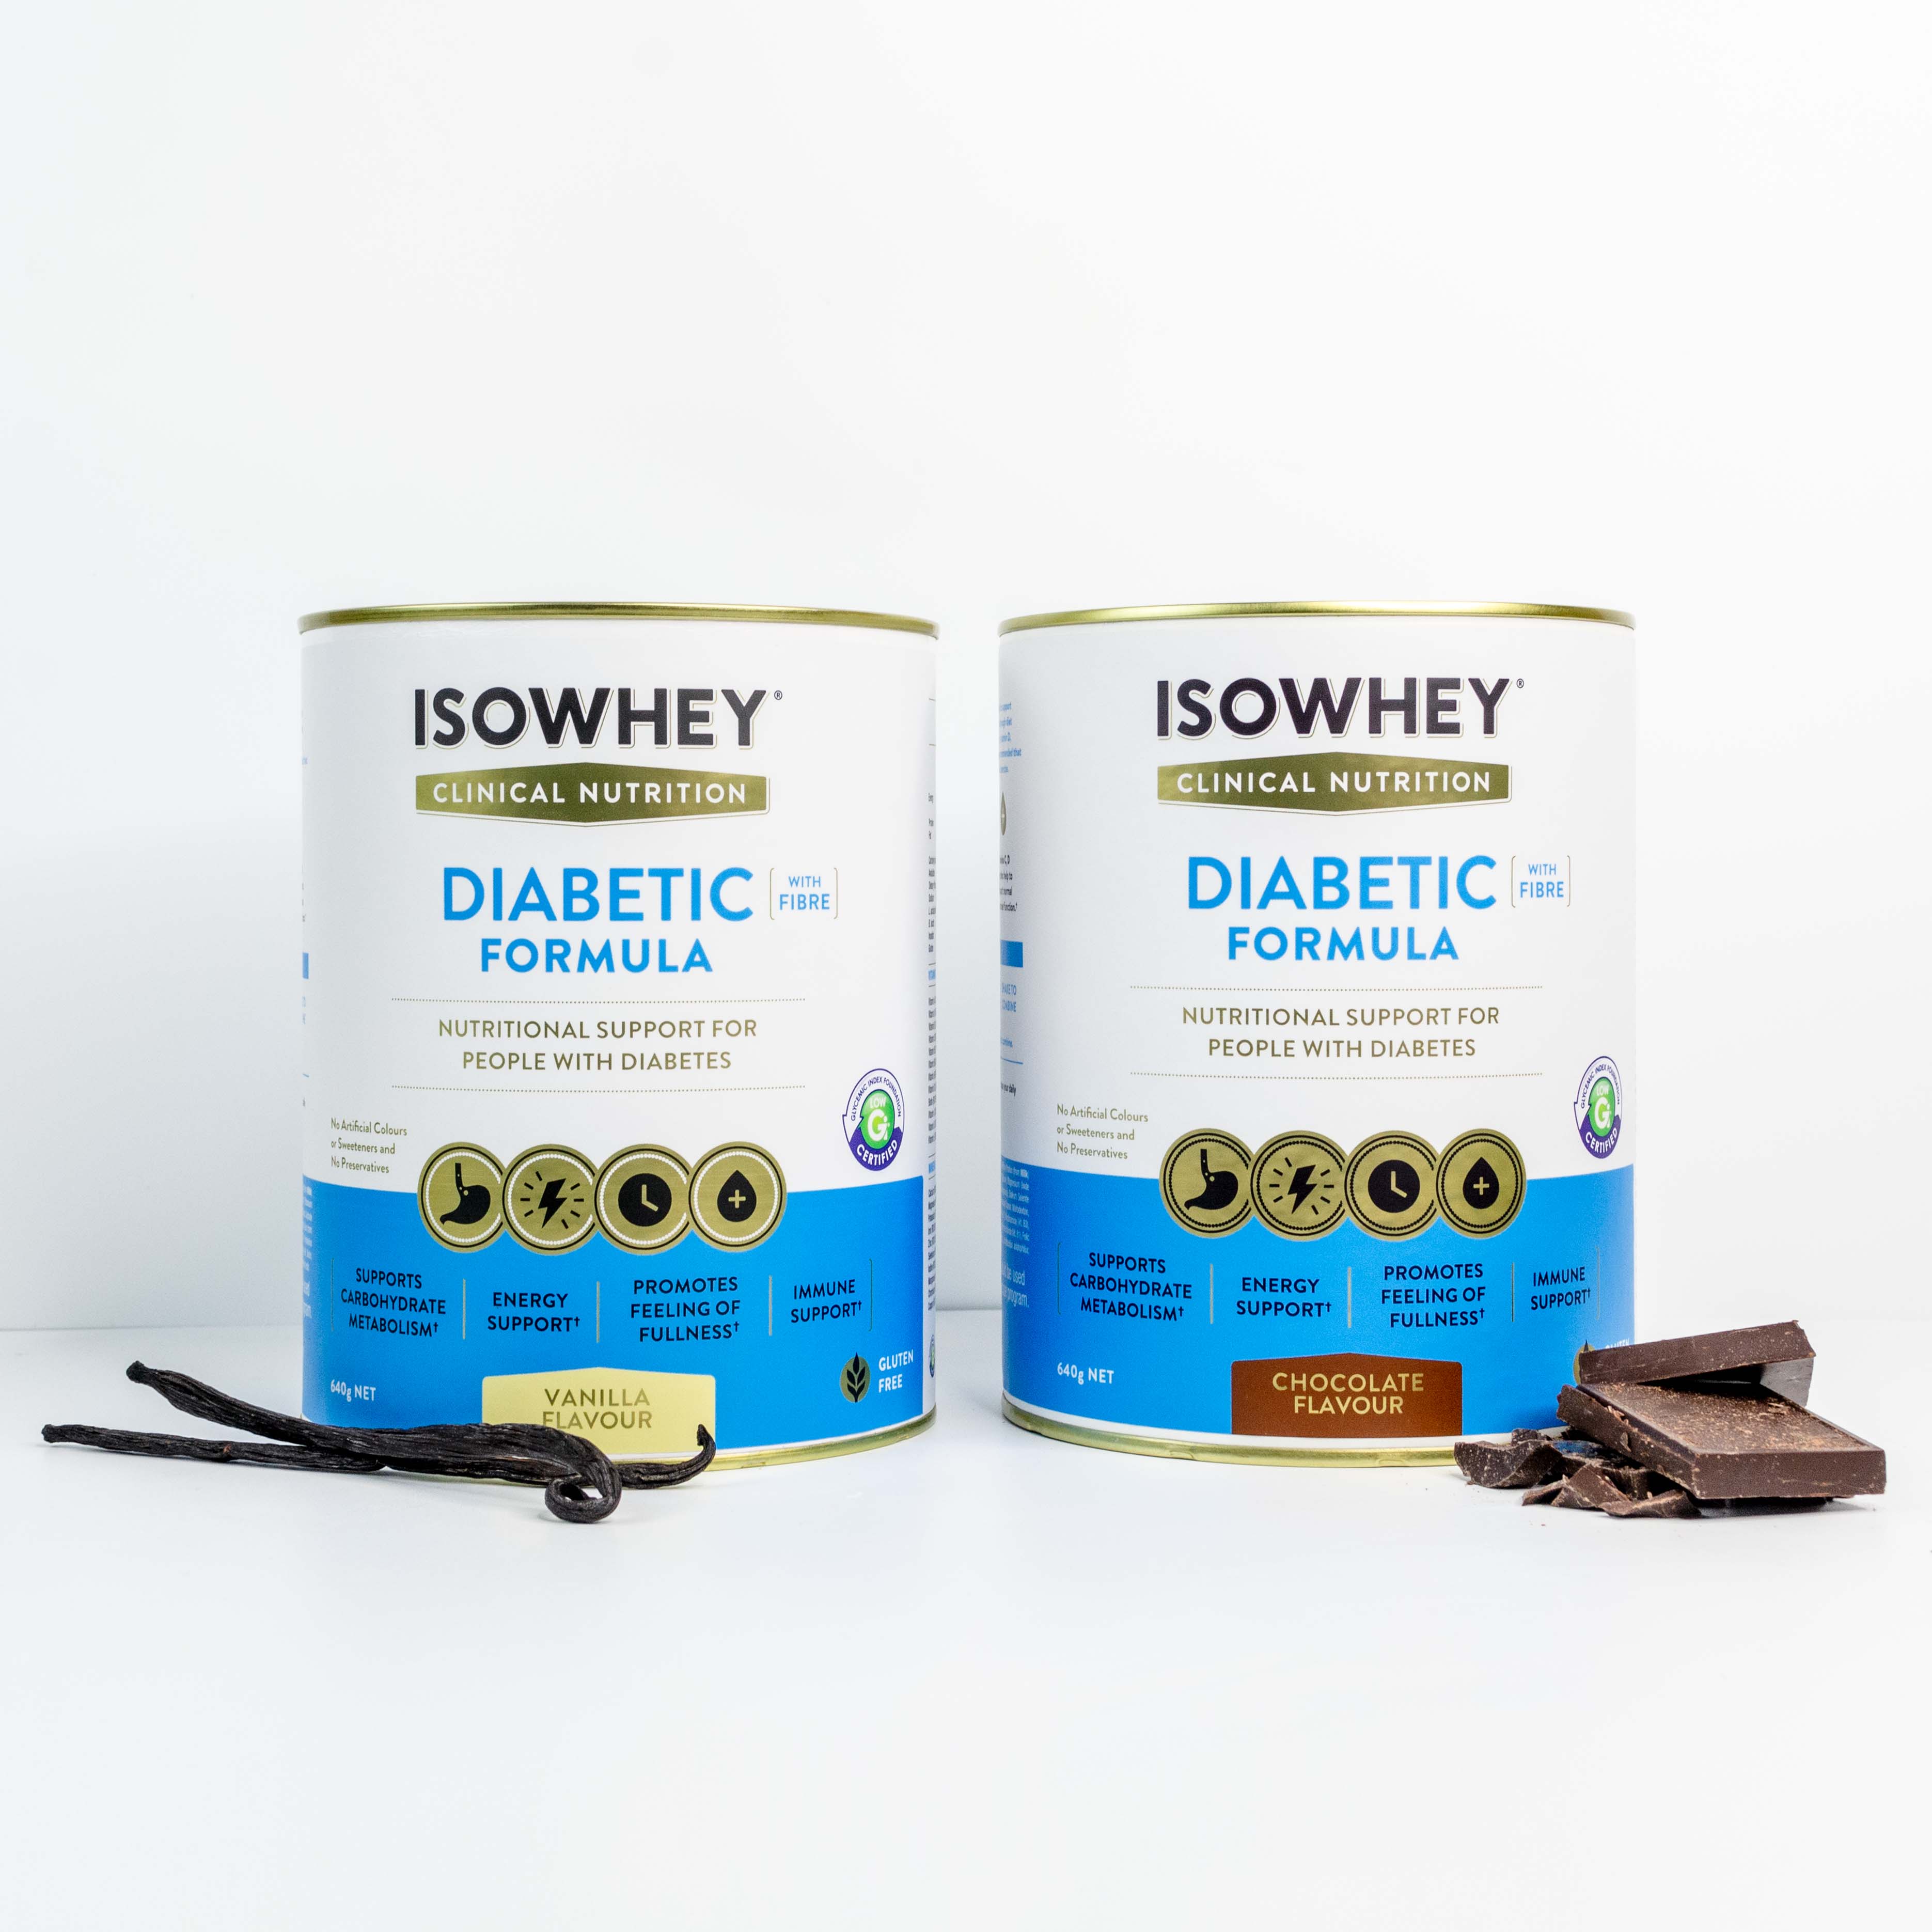 2 cans of IsoWhey Clinical Nutrition Diabetic Formula 640g - Chocolate and Vanilla Flavor